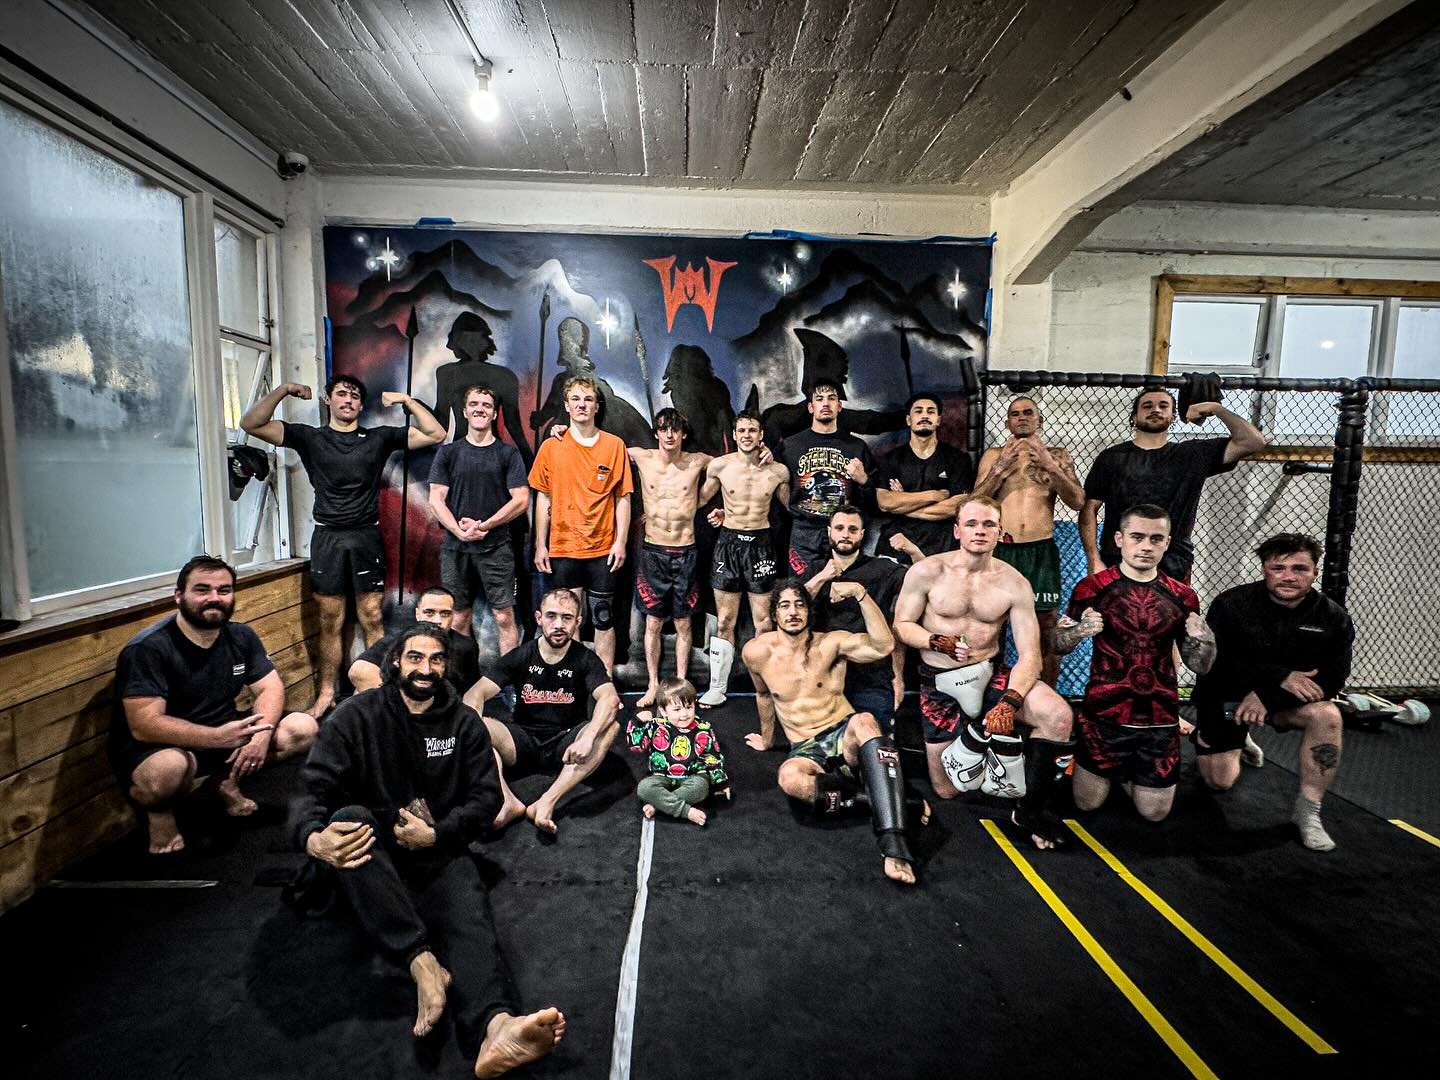 Last Hard Sparring done for the Captain. 

Thursday, we taking his talent to the big smoke for ANZAC WARS. 

#warriortrainingacademynz
#warriormuaythainz 
#wellingtonsfinest